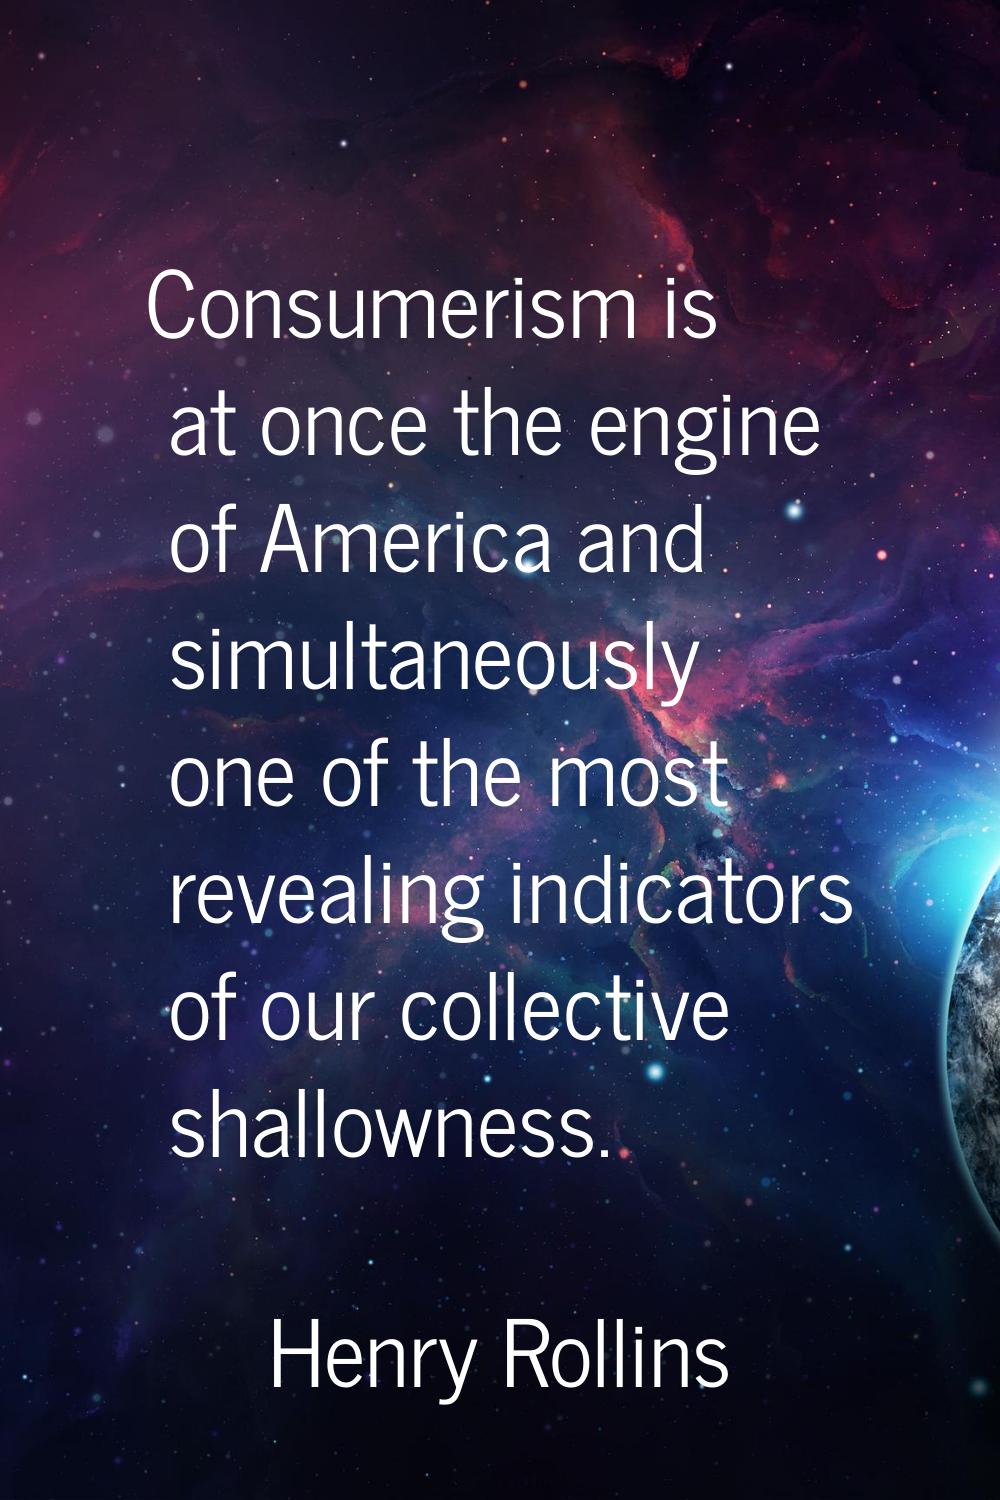 Consumerism is at once the engine of America and simultaneously one of the most revealing indicator